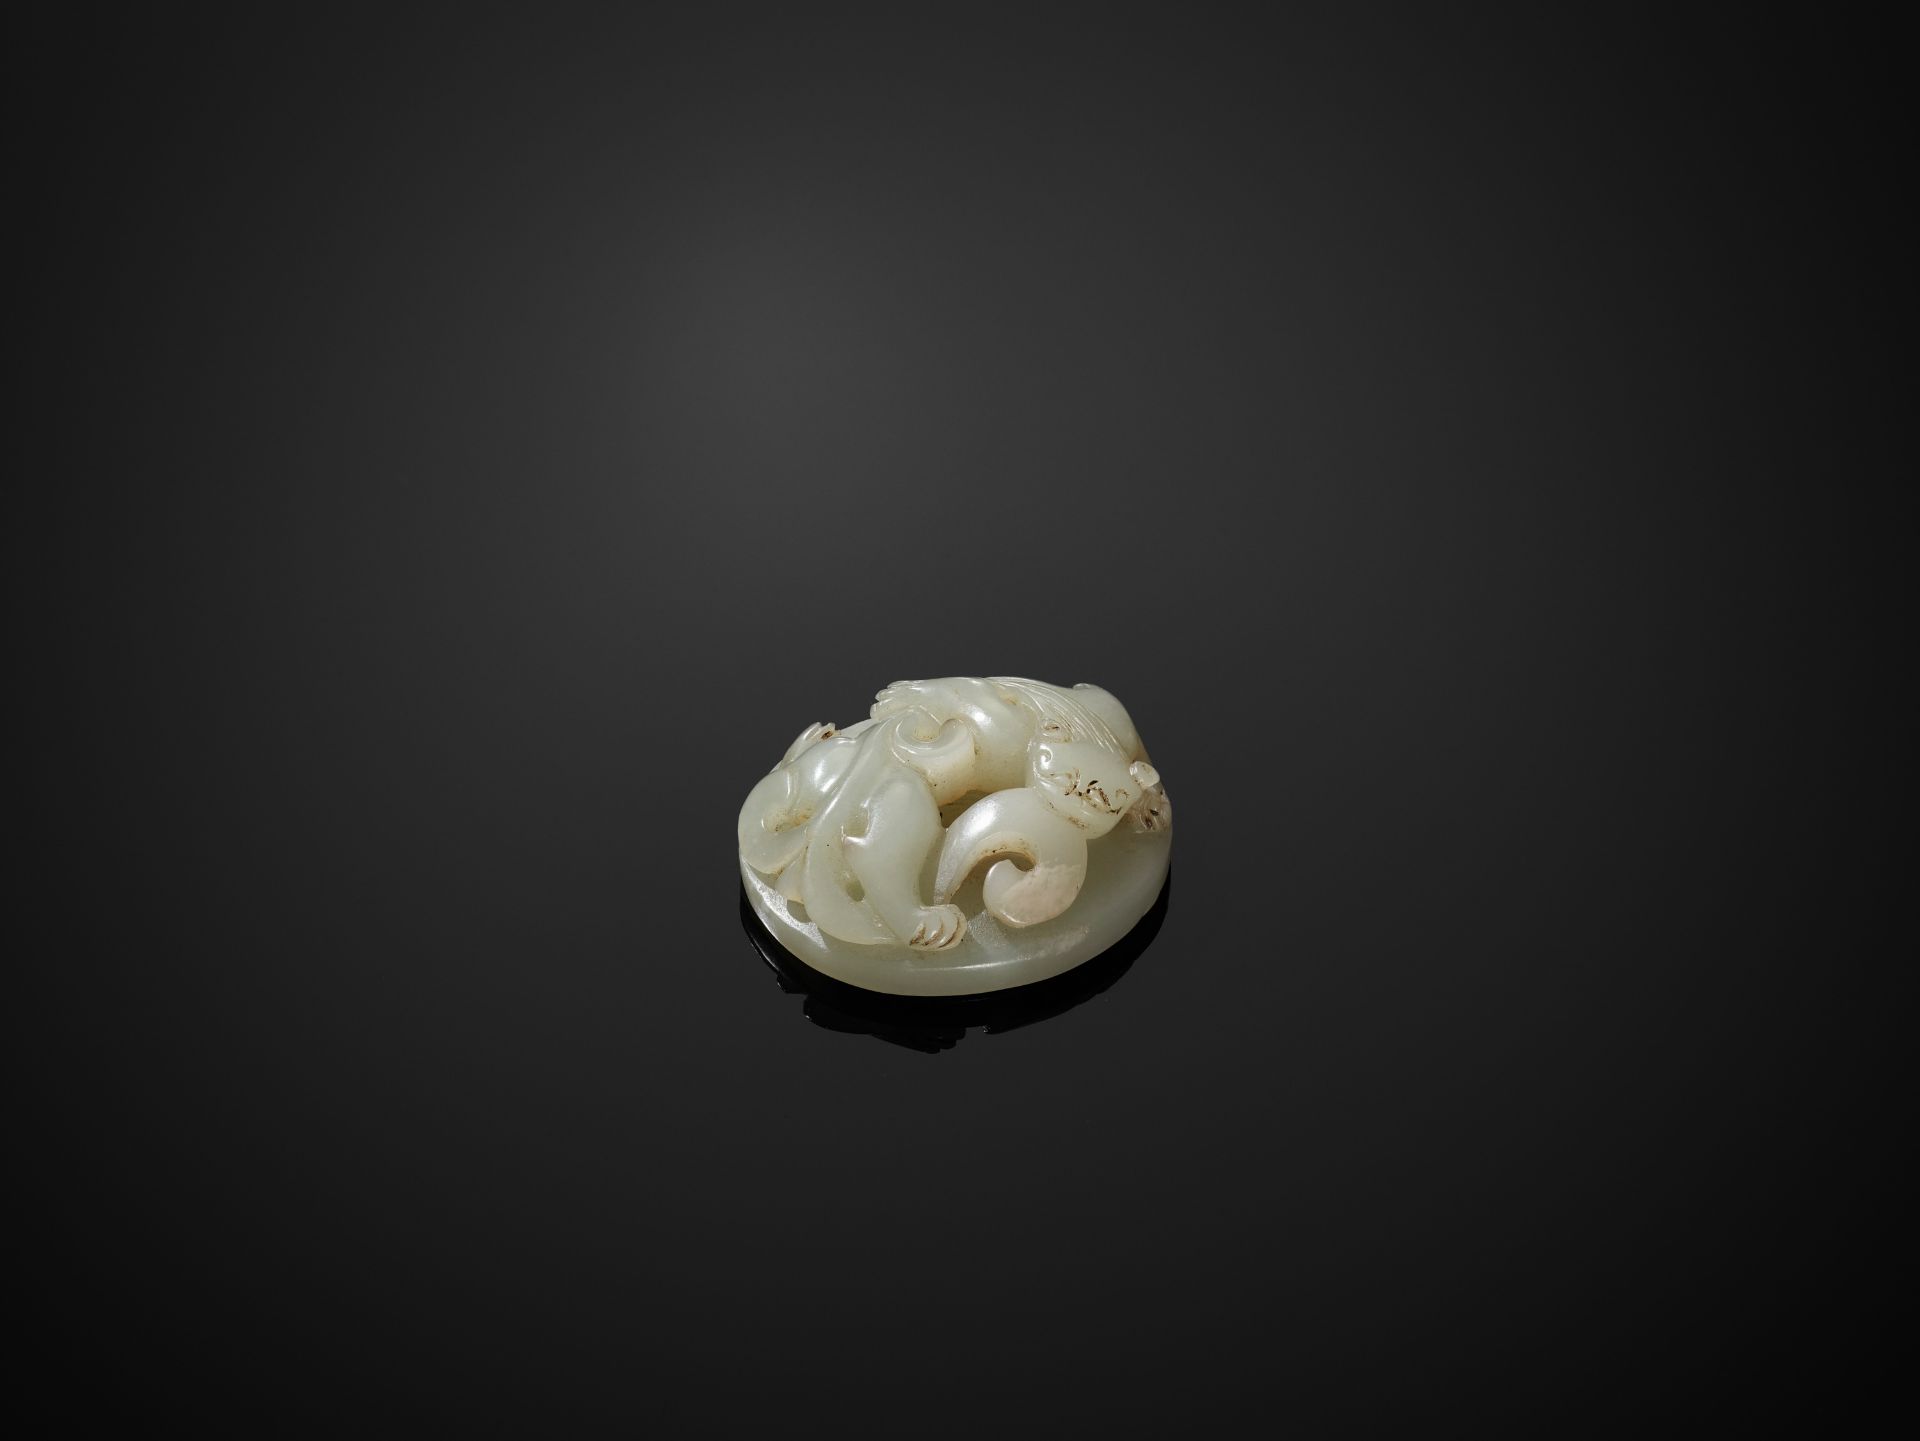 AN EXQUISITE SMALL PALE CELADON JADE SWORD POMMEL WITH HORNLESS DRAGON, WESTERN HAN - Image 2 of 6